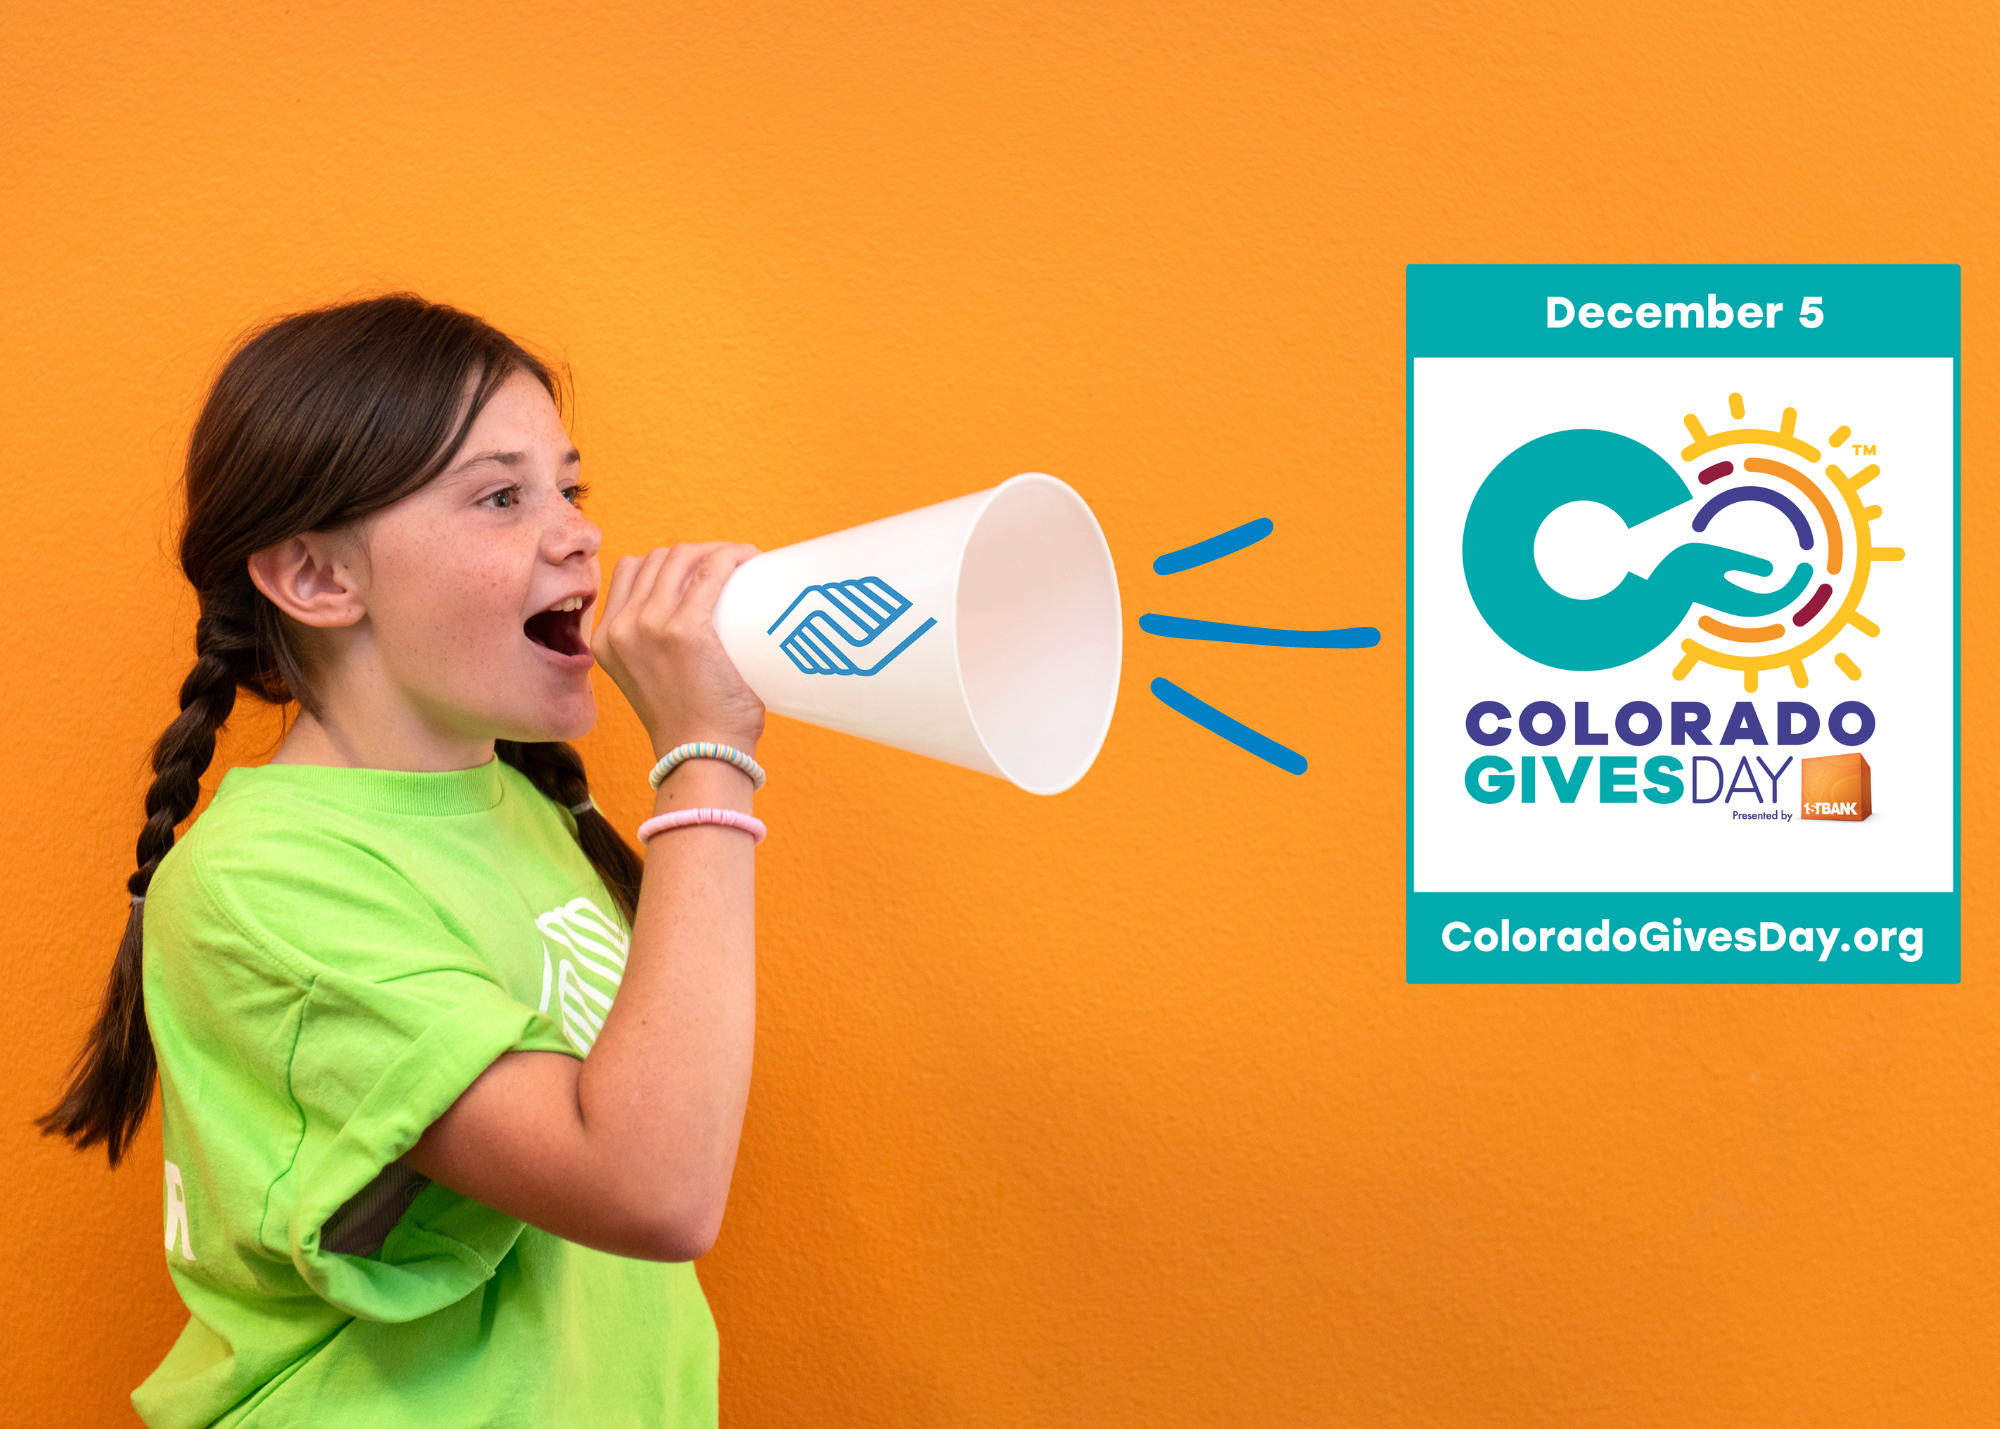 image of member and colorado gives day logo